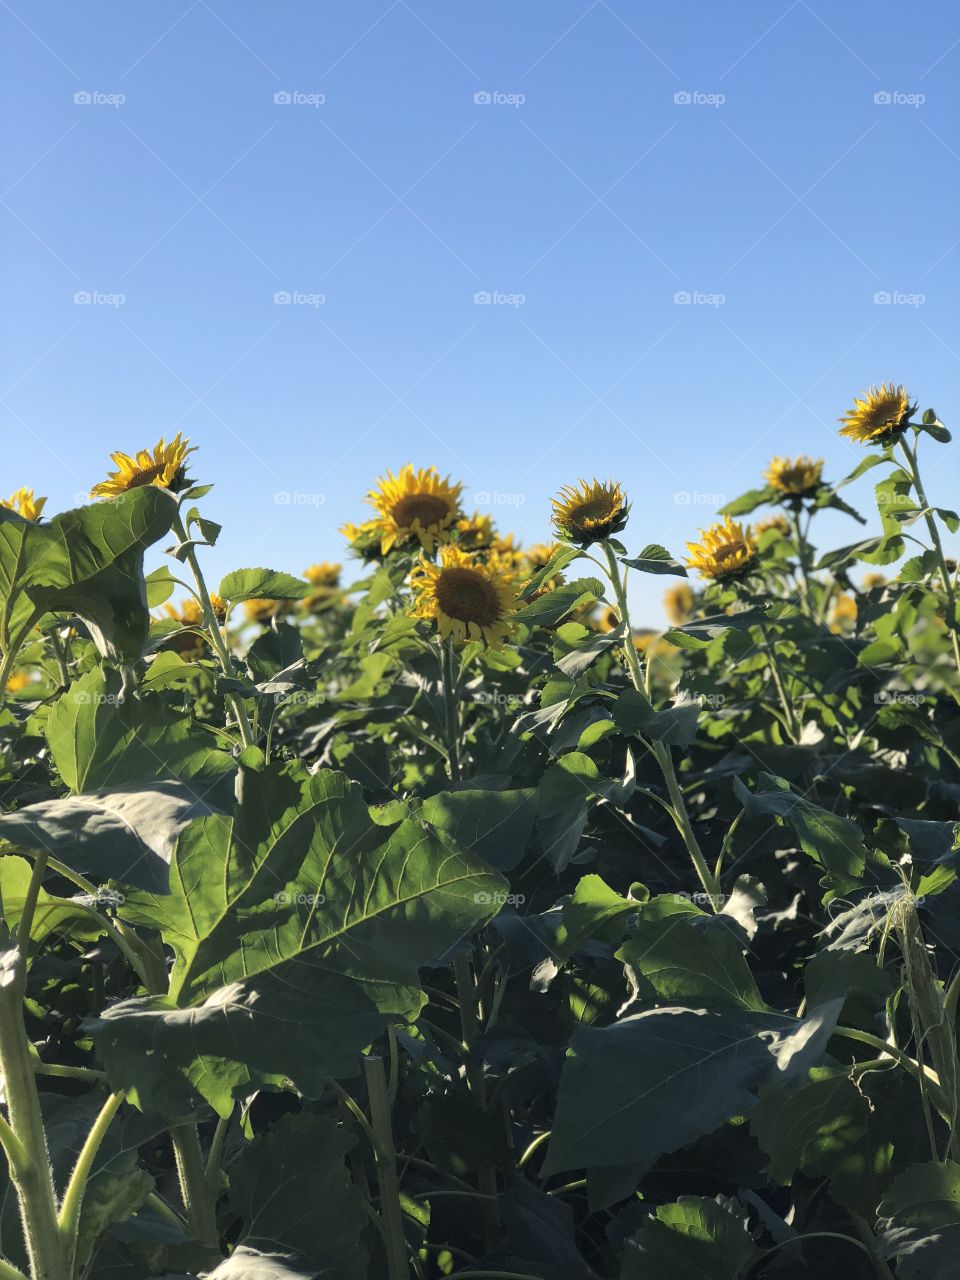 Sunflowers, large green leaves and a cloudless blue sky